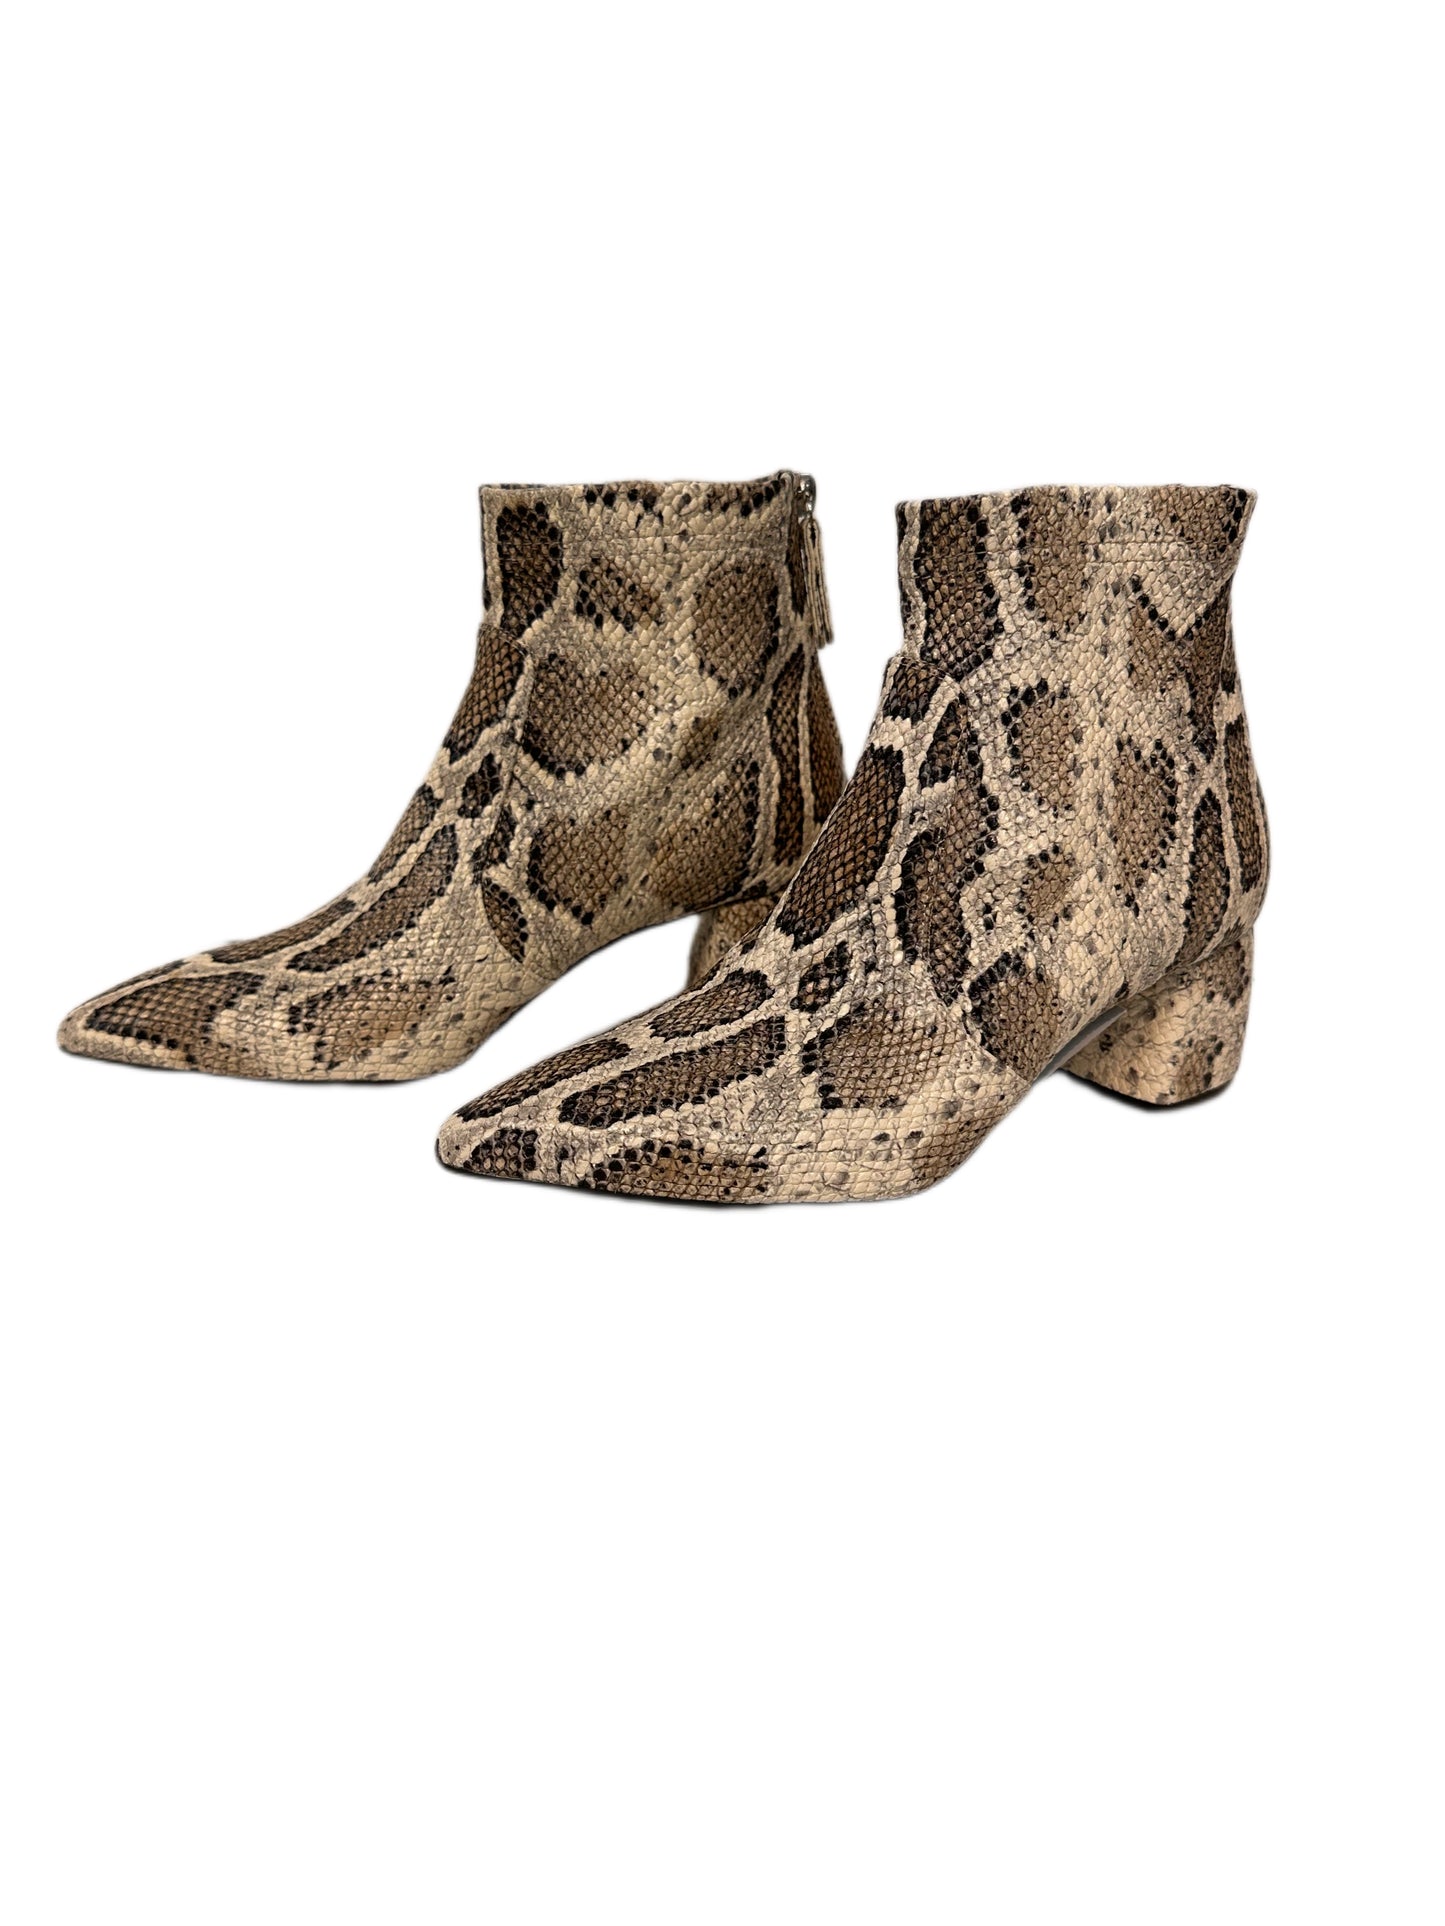 AGL Leather Snakeskin Embossed Boots Ivory